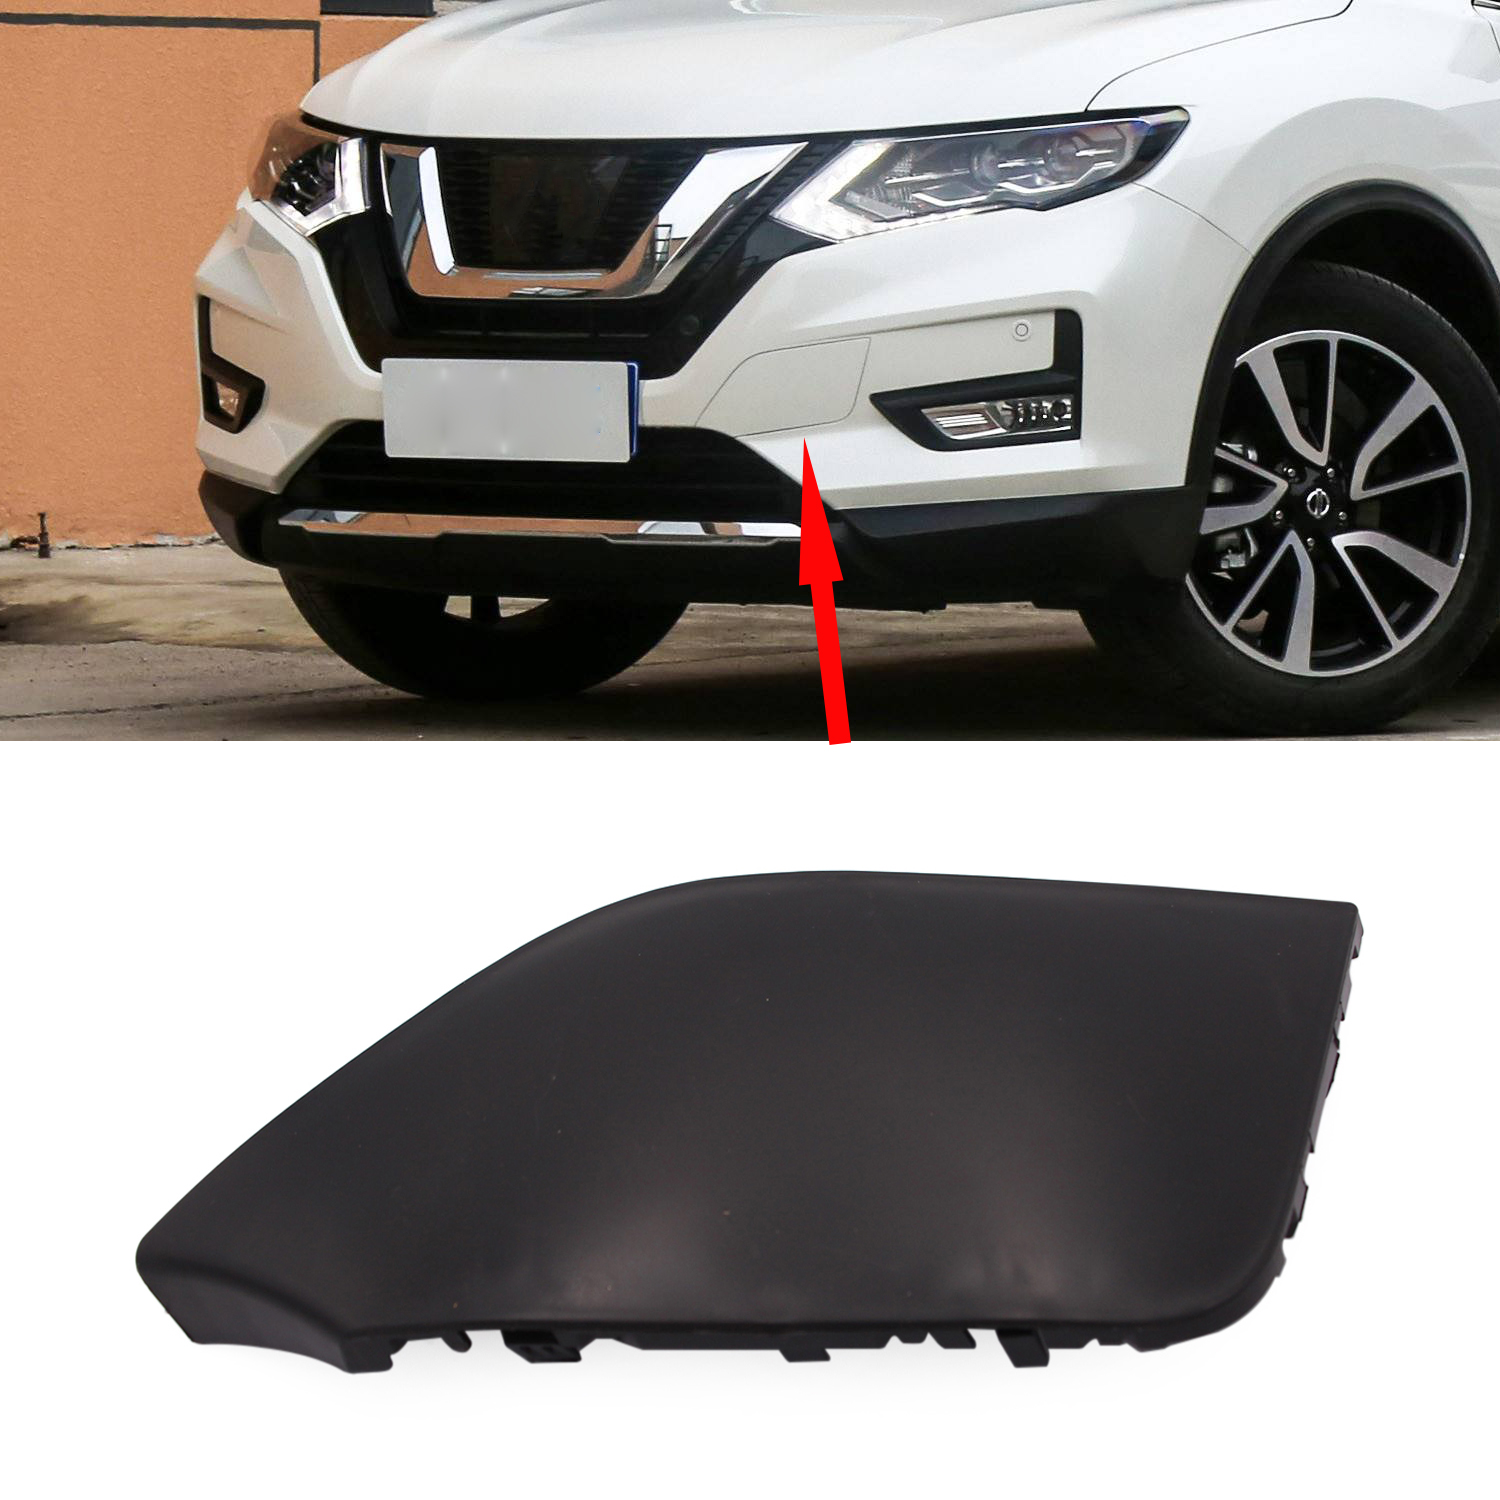 Front Bumper Tow Hook Bracket Cover 622A0-6FL0H Fits for 2017-2018 Nissan Rogue | eBay 2017 Nissan Rogue Front Tow Hook Cover